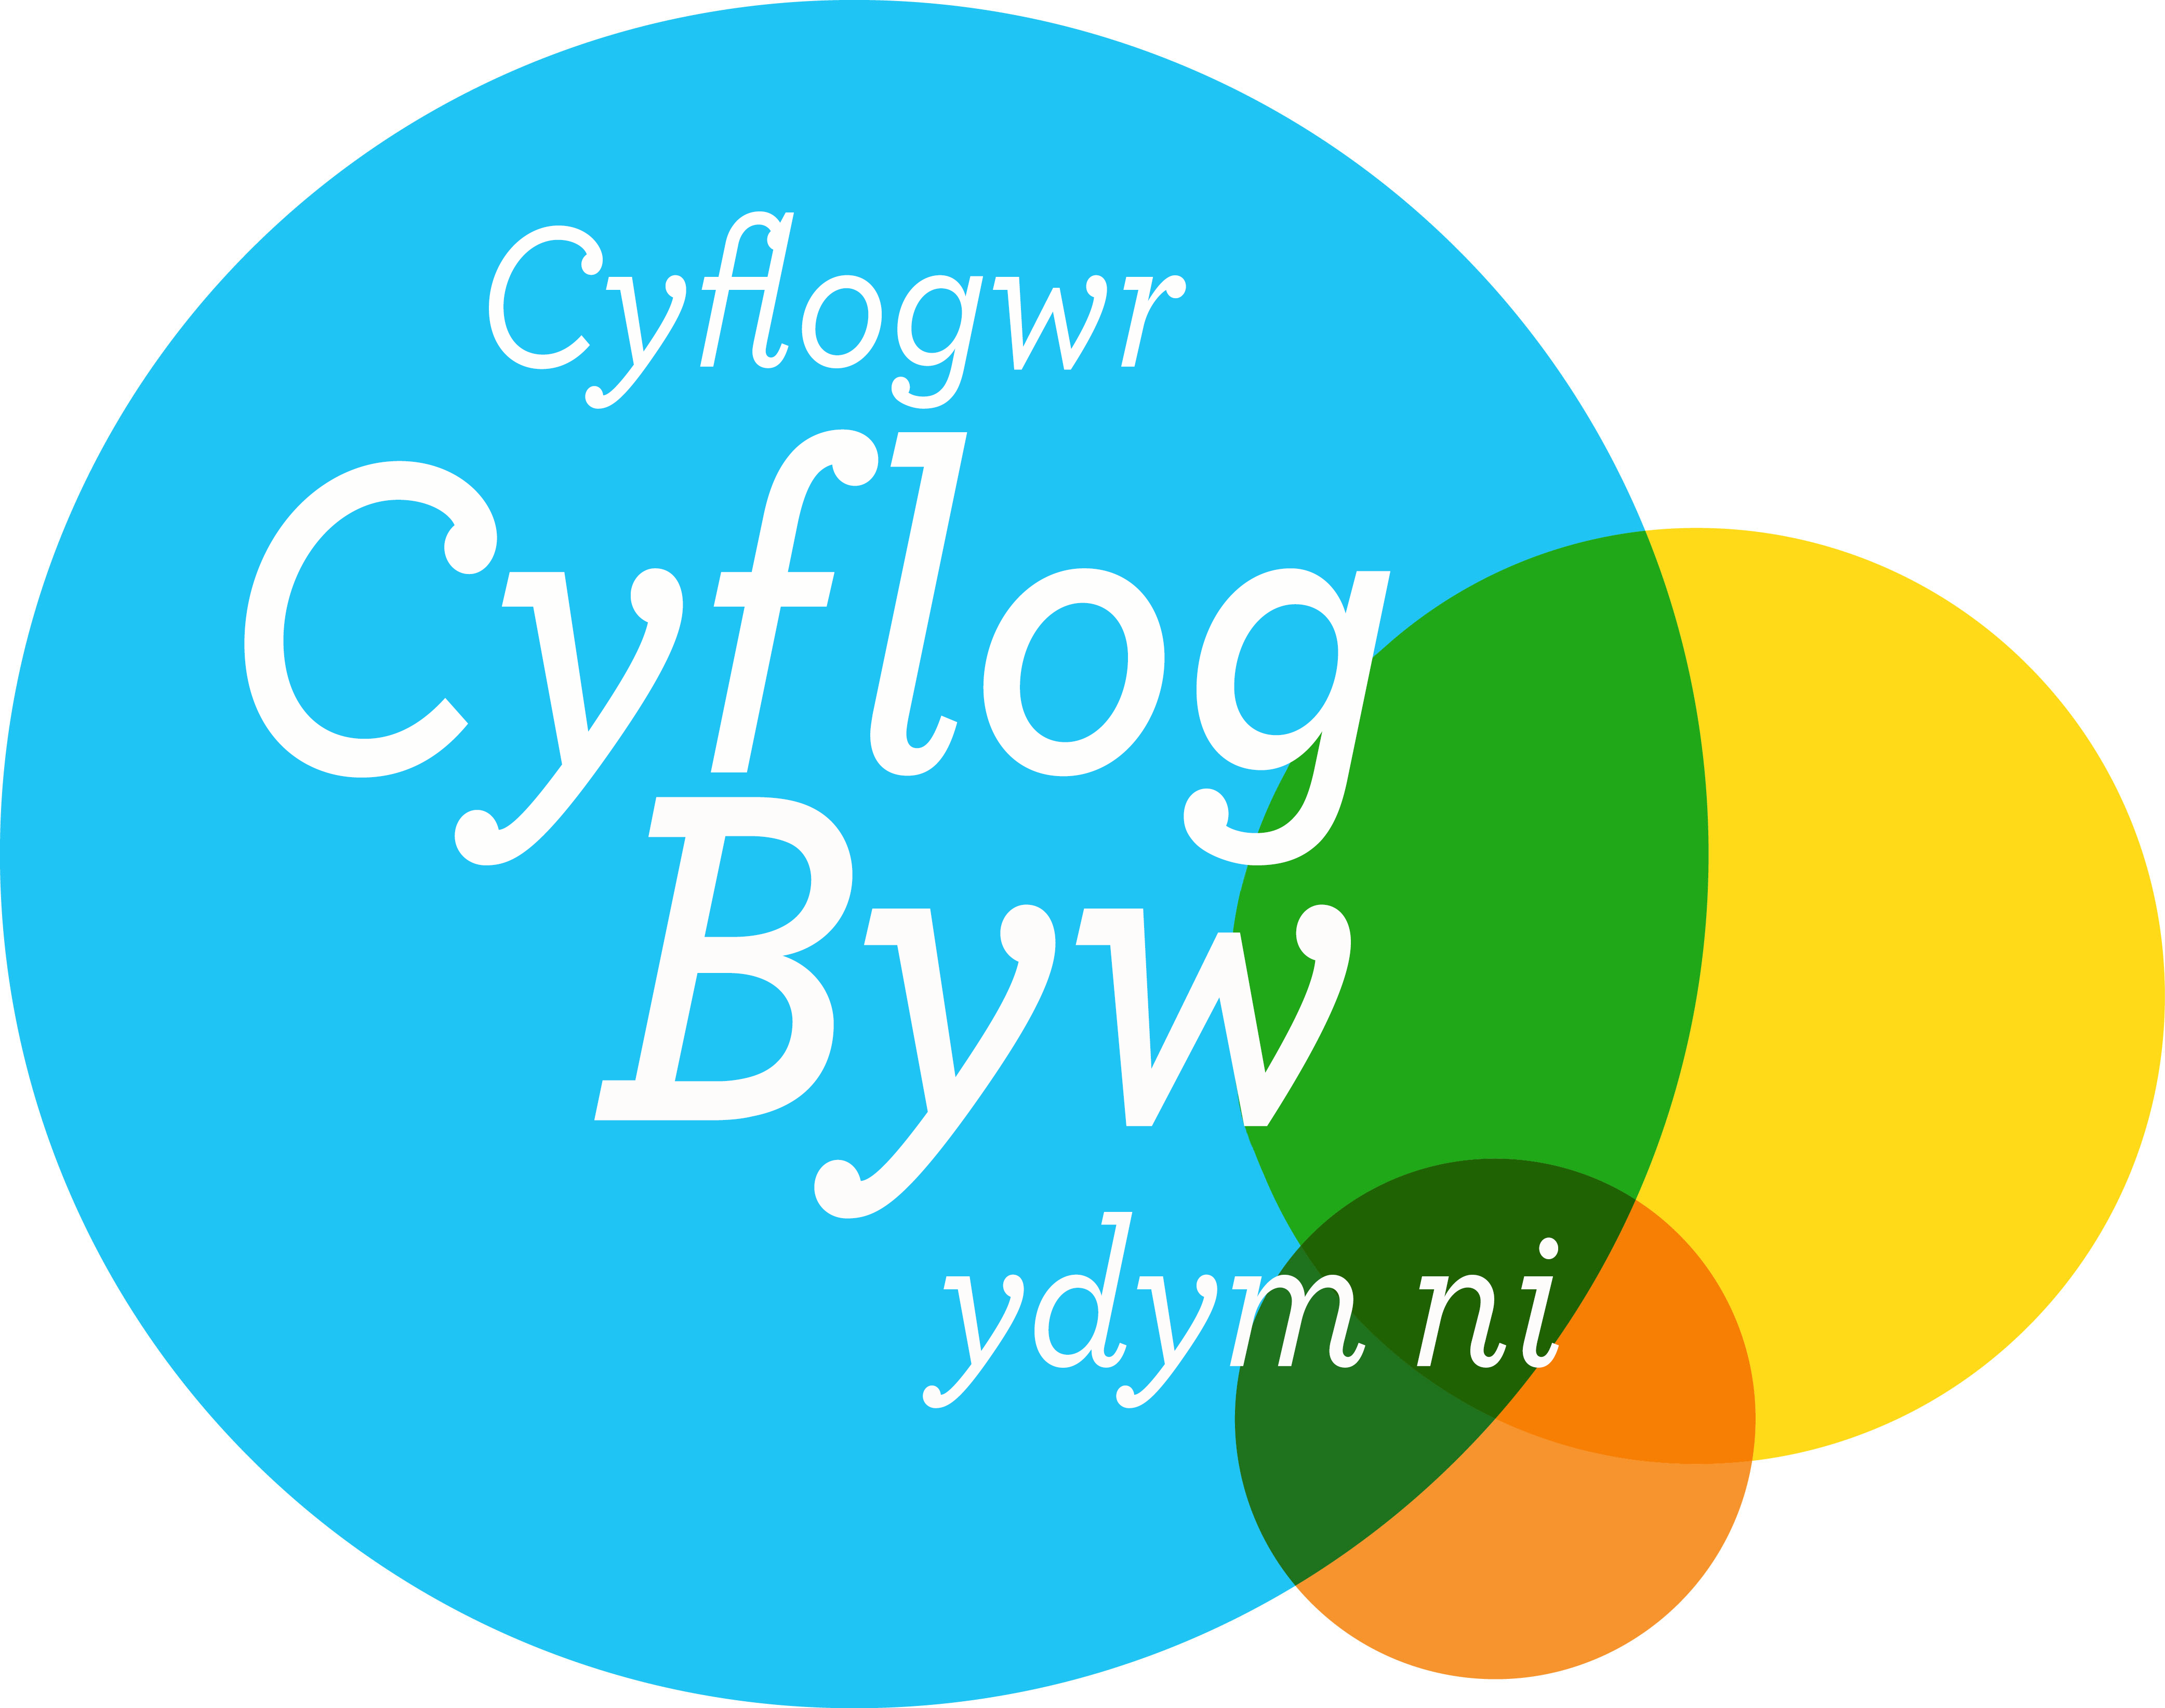 Living Wage Employer - Welsh